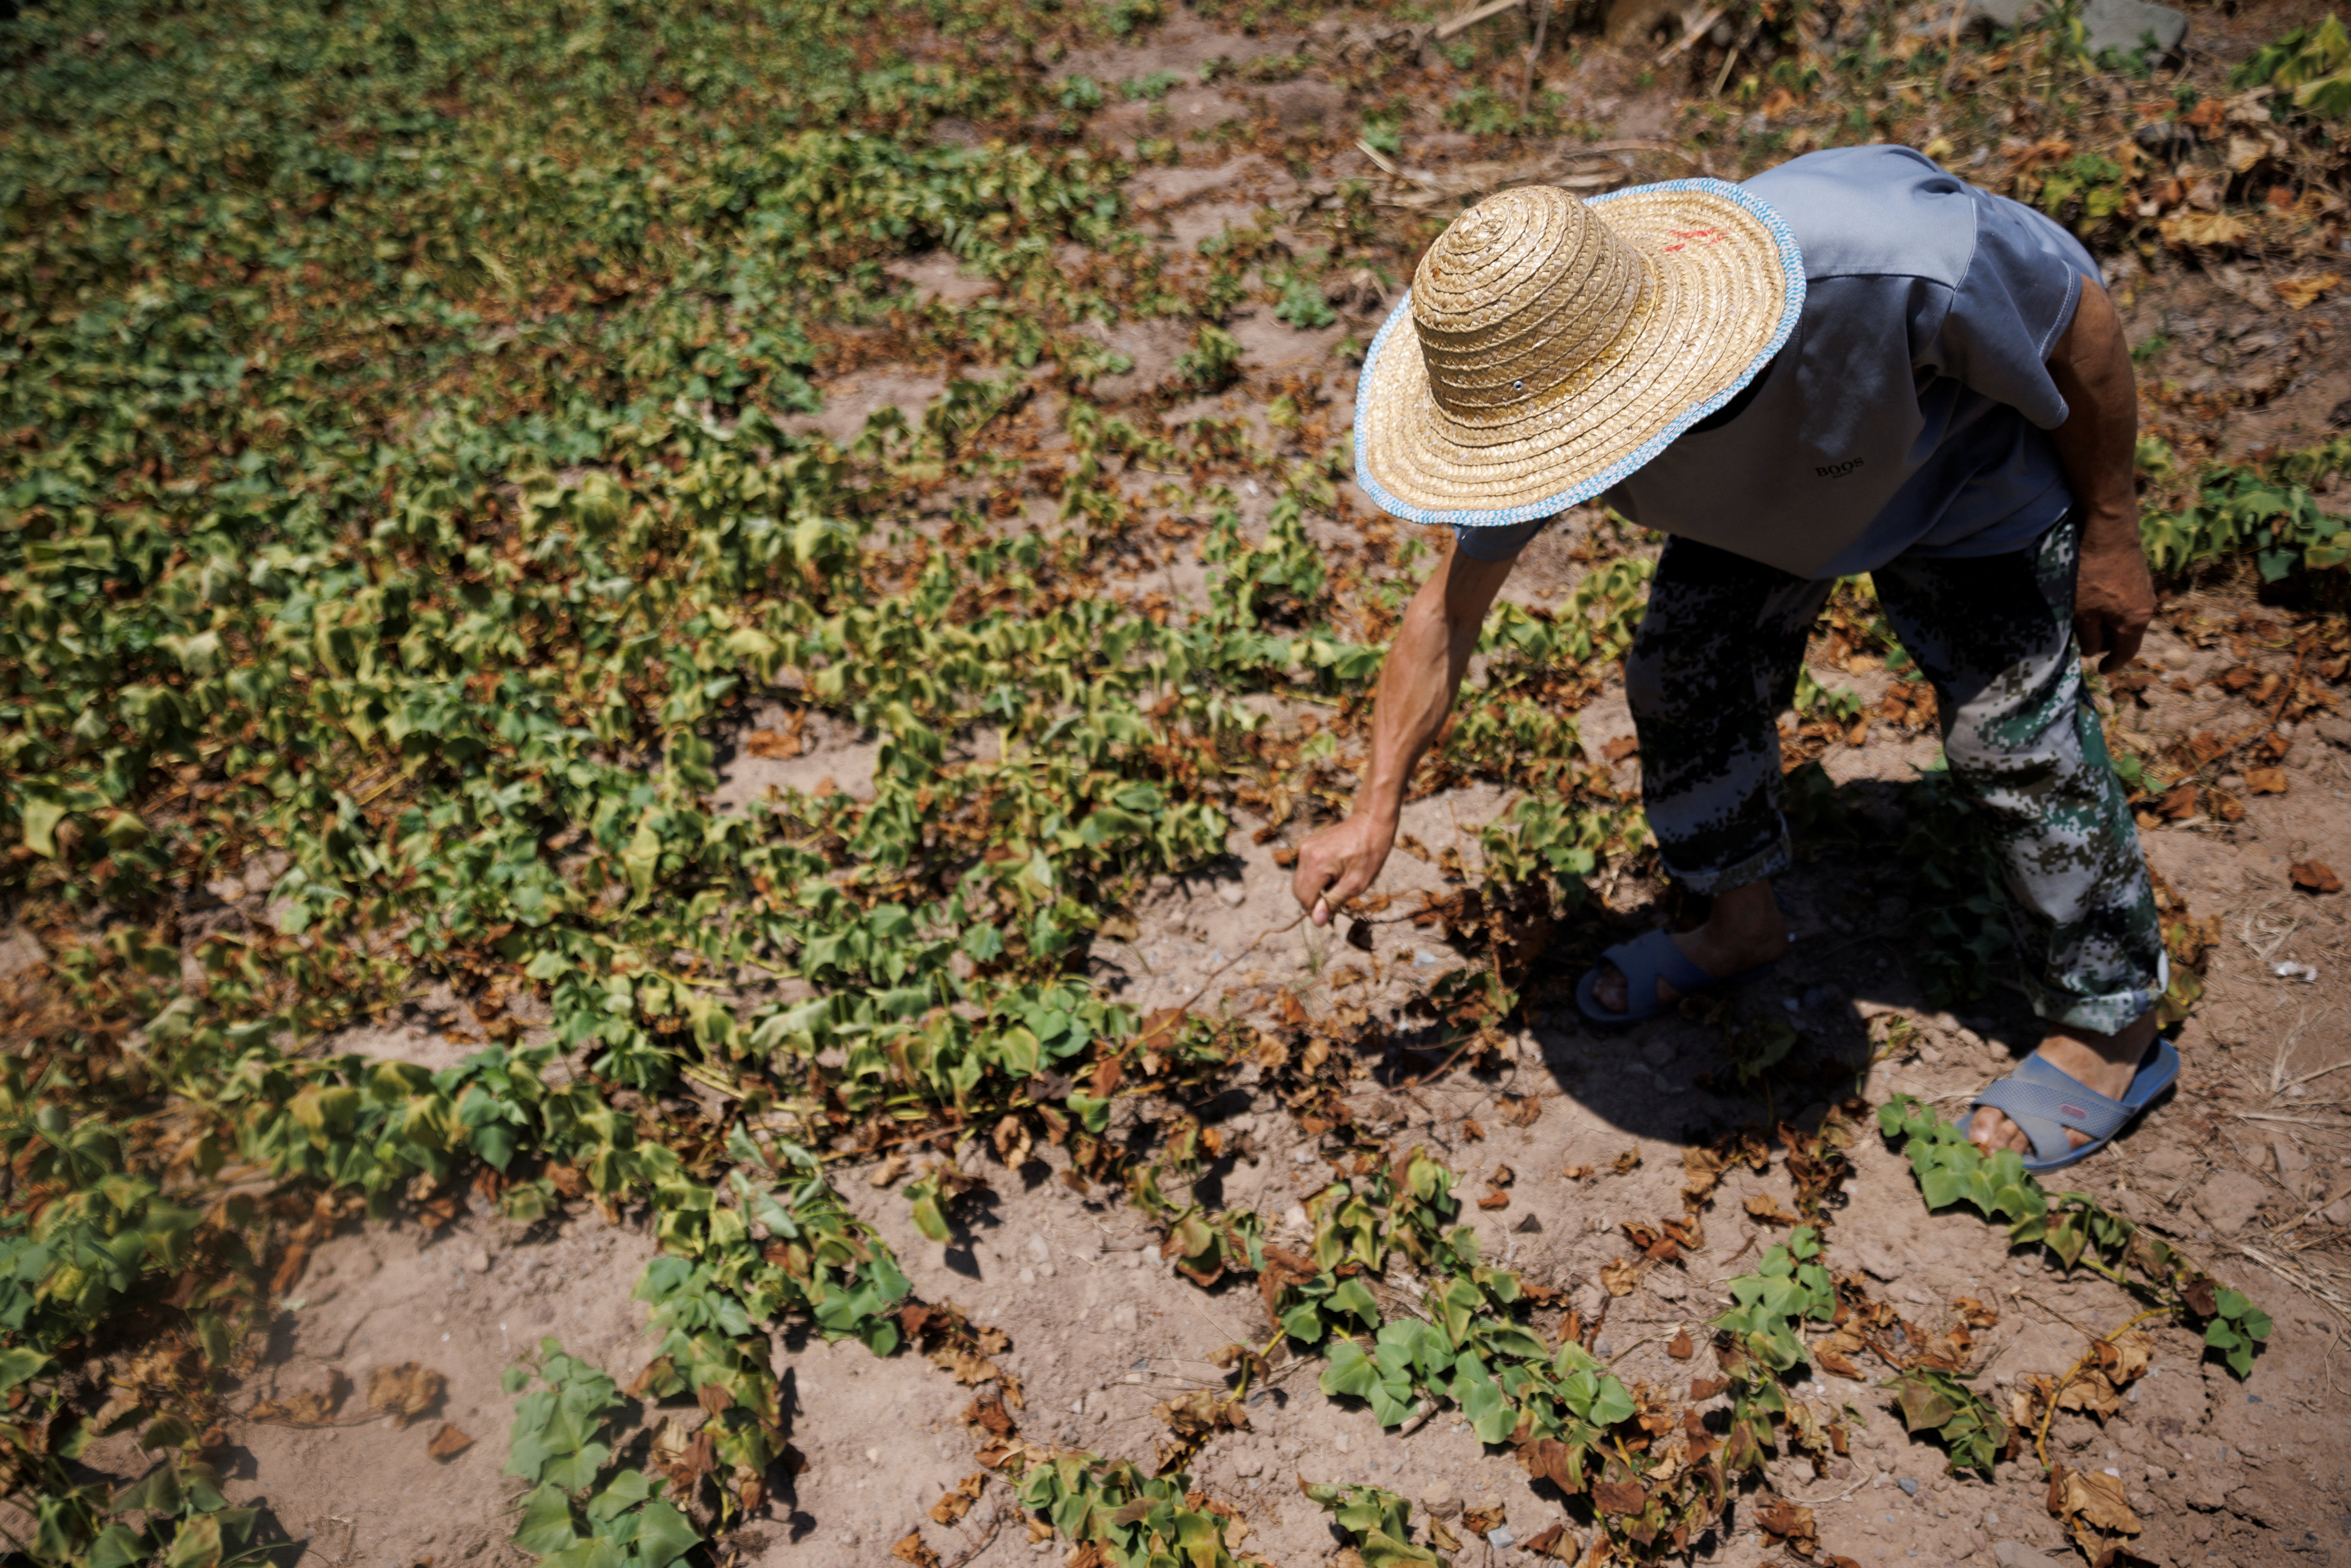 Local farrmer Chen Xiaohua, 68, shows his dead sweet potato plants after all his crops perished as the region is experiencing a drought in Fuyuan village in Chongqing